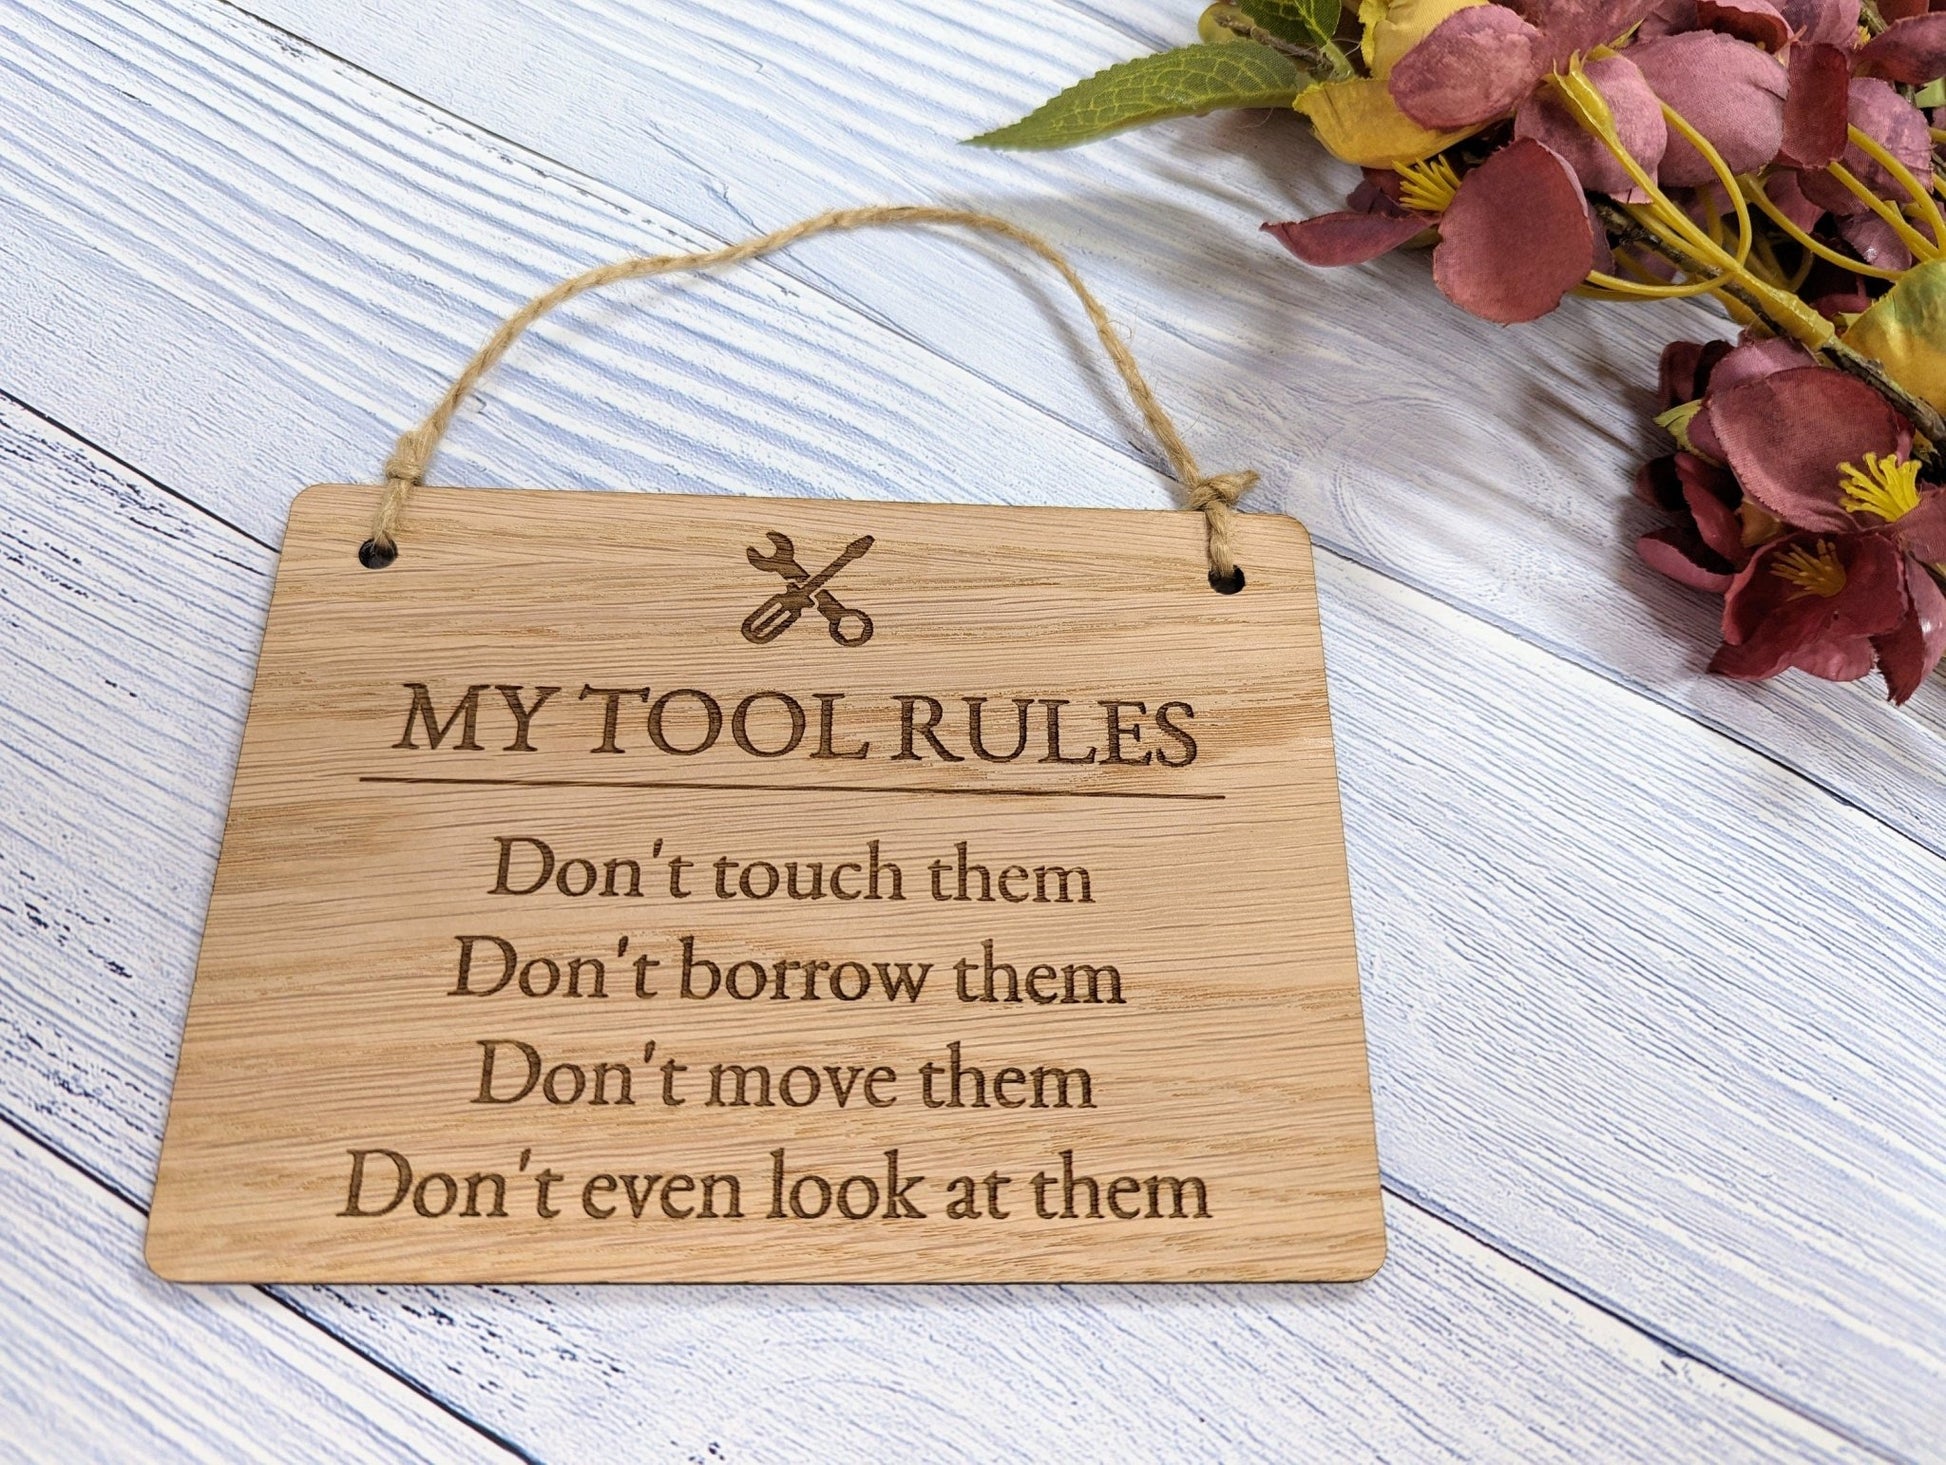 My Tool Rules - Wooden Sign - Perfect Gift for Dad, Husband, or Grandad Who Loves His Tools - Workshop Decor - CherryGroveCraft